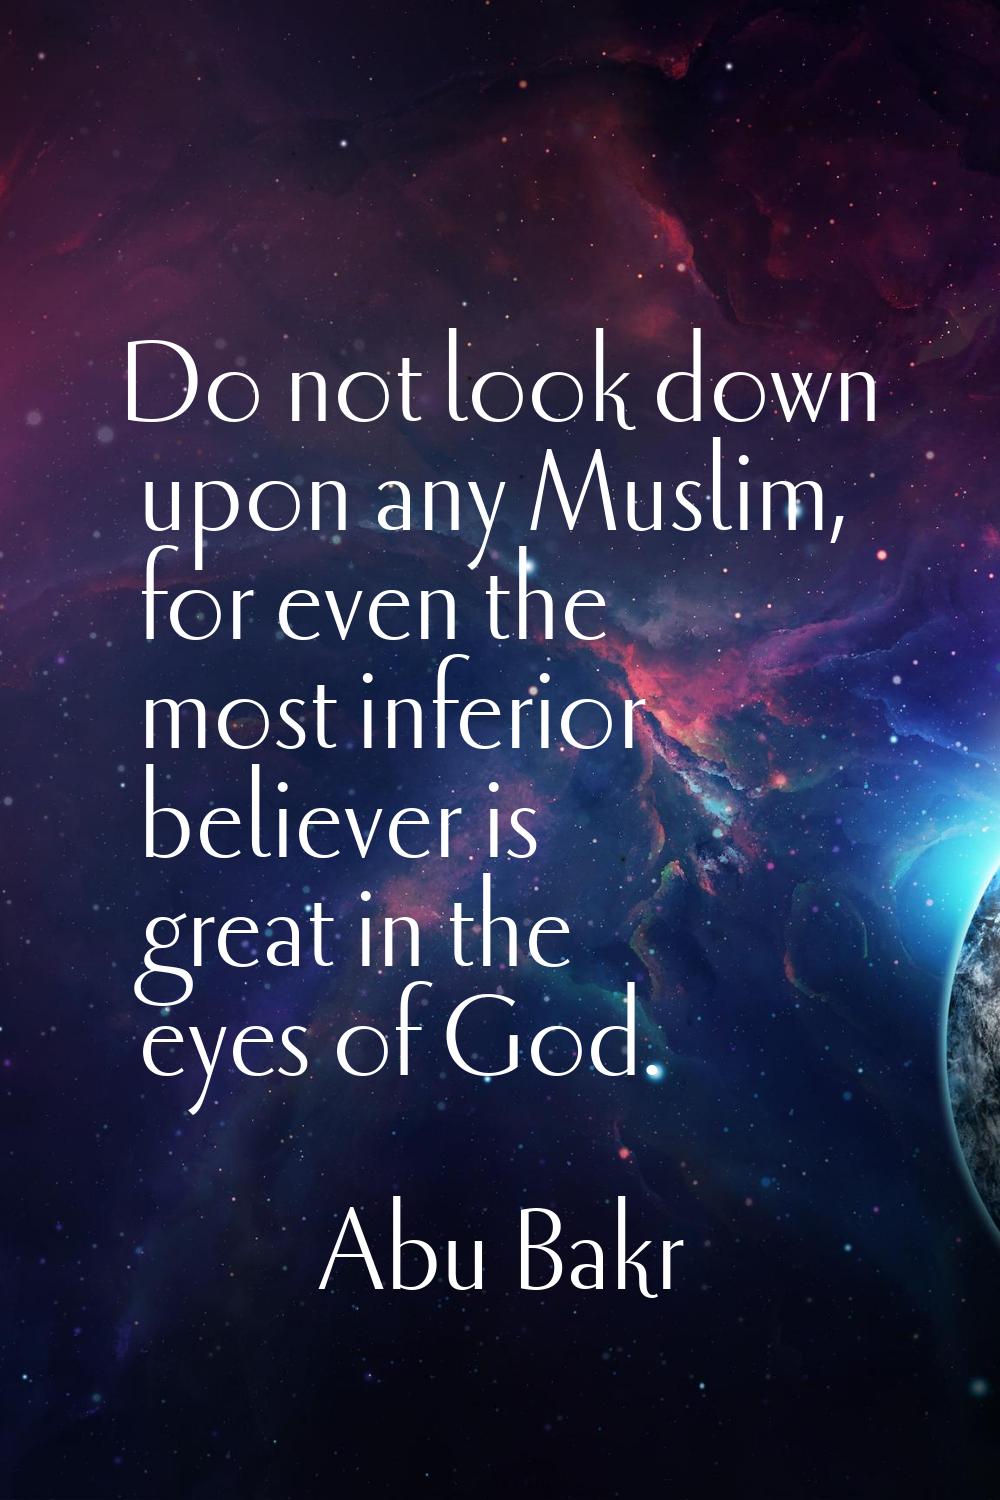 Do not look down upon any Muslim, for even the most inferior believer is great in the eyes of God.